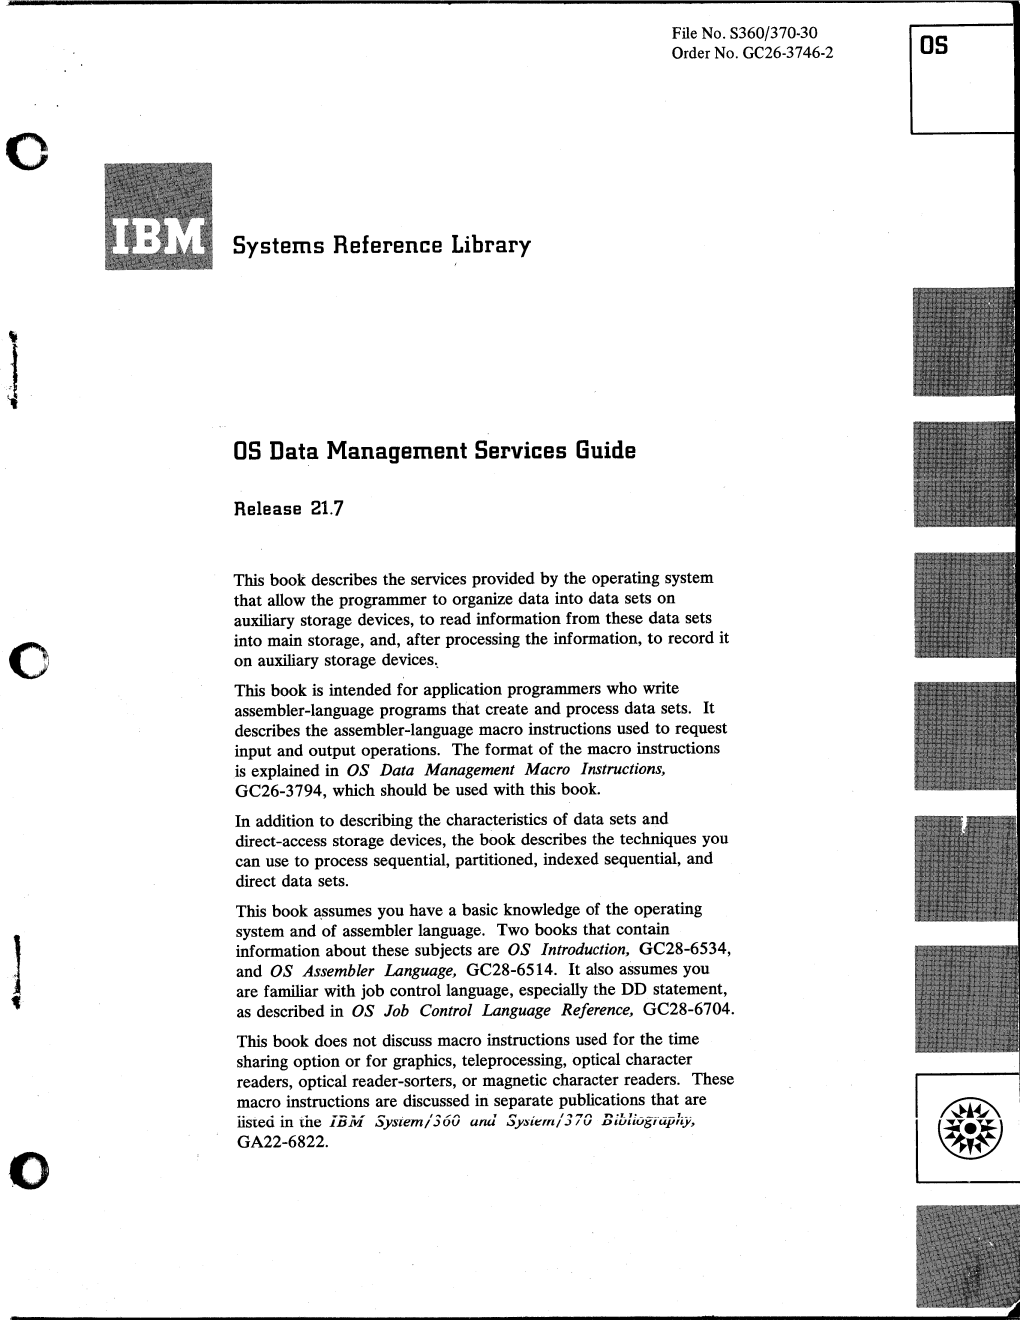 Systems Reference Library OS Data Management Services Guide